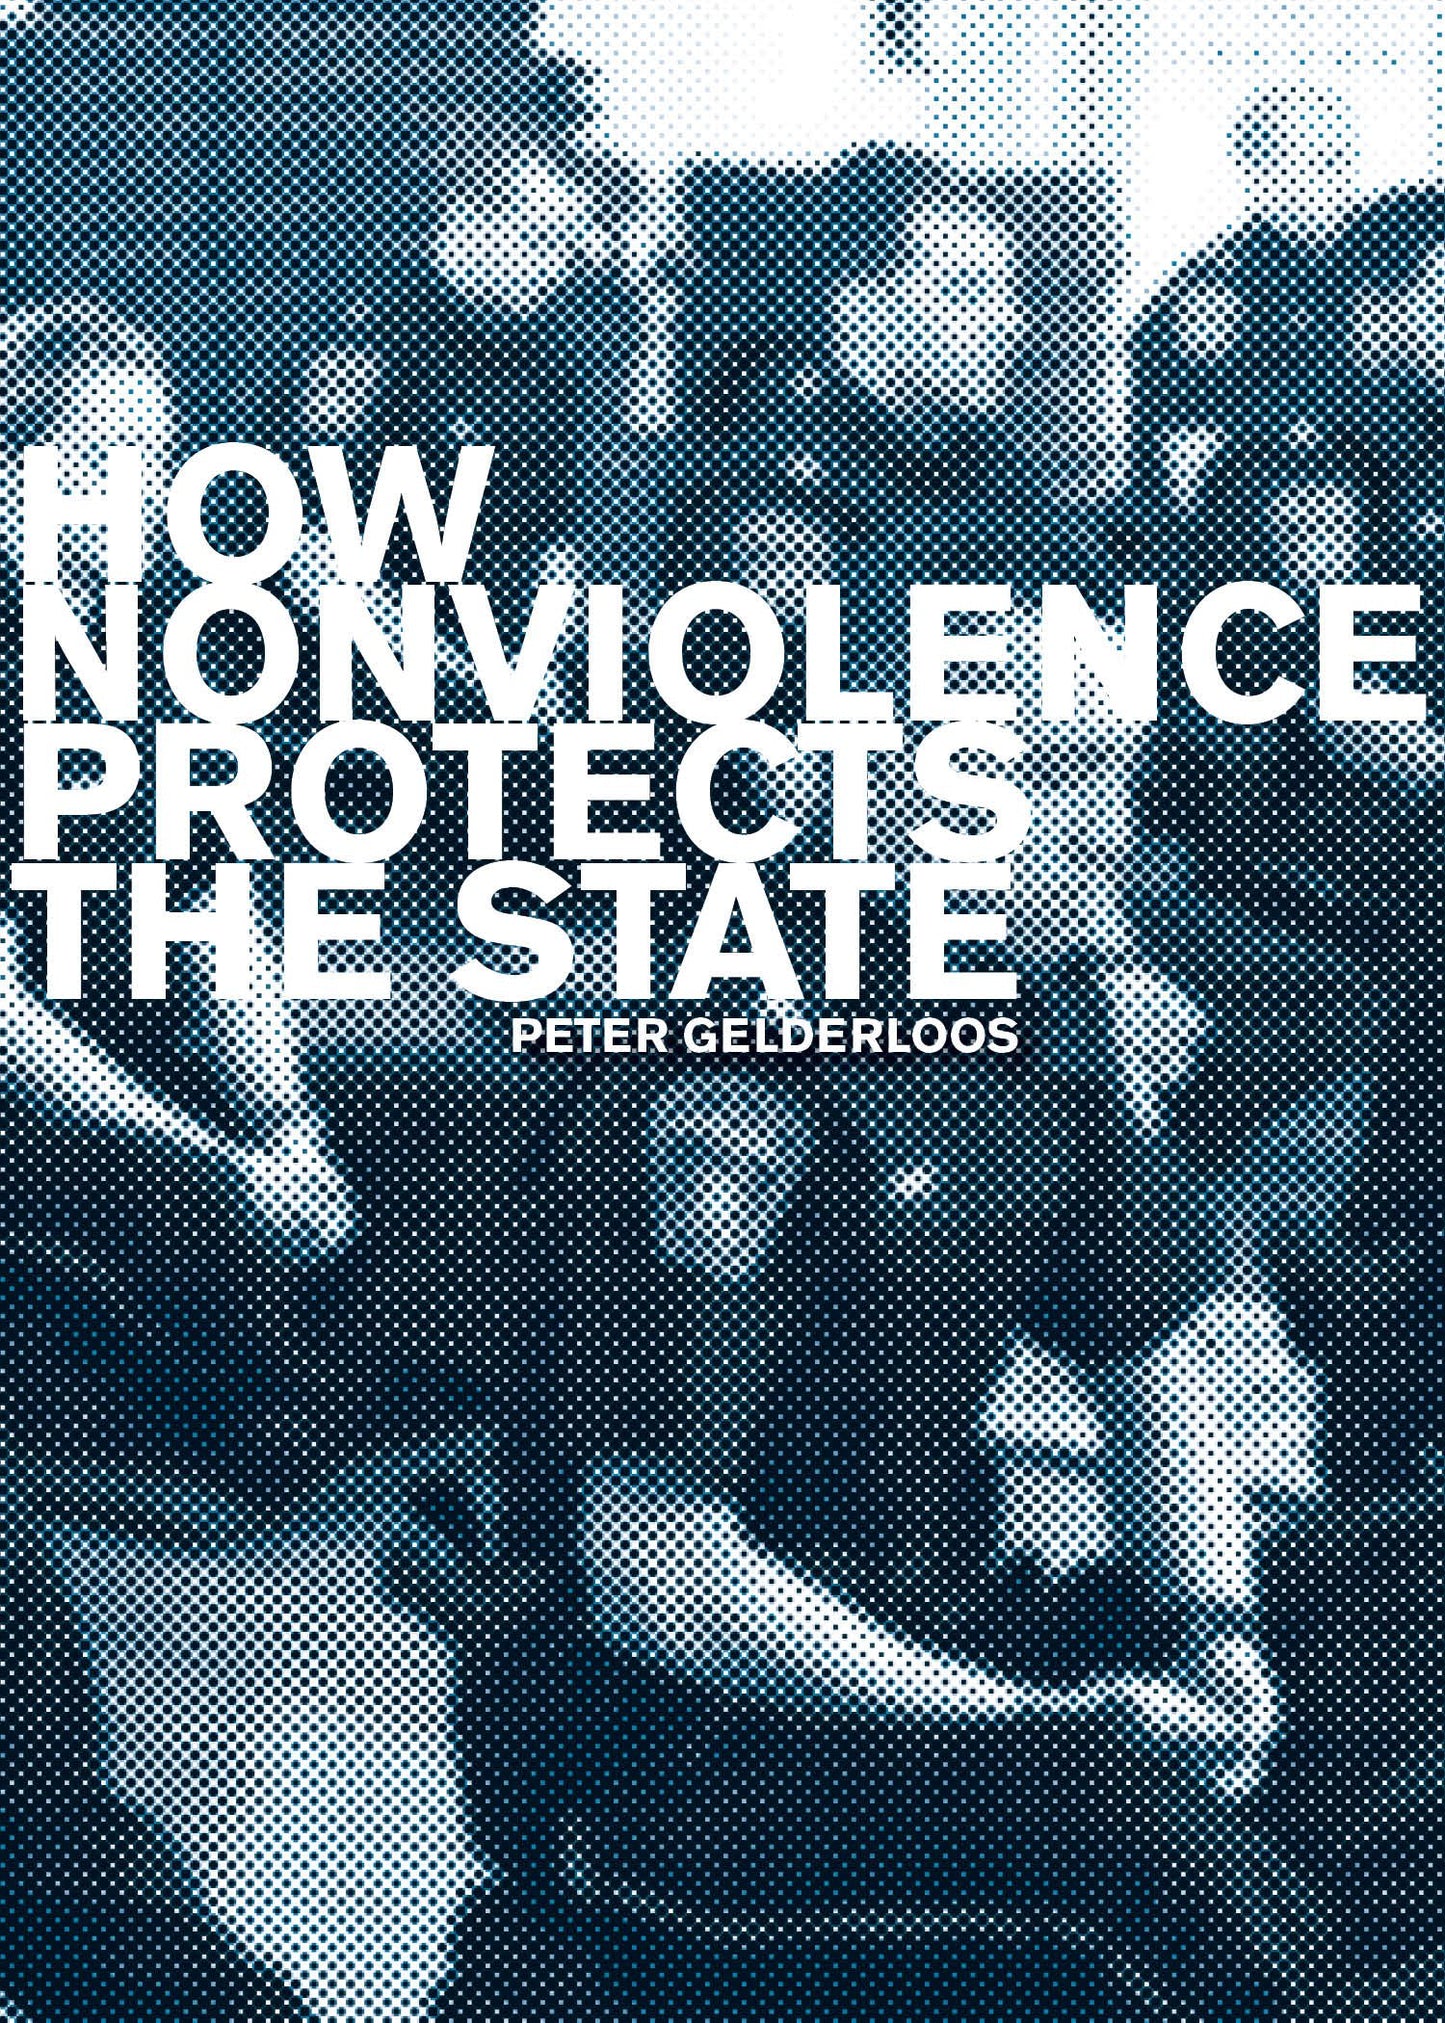 How Nonviolence Protects the State, by Peter Gelderloos